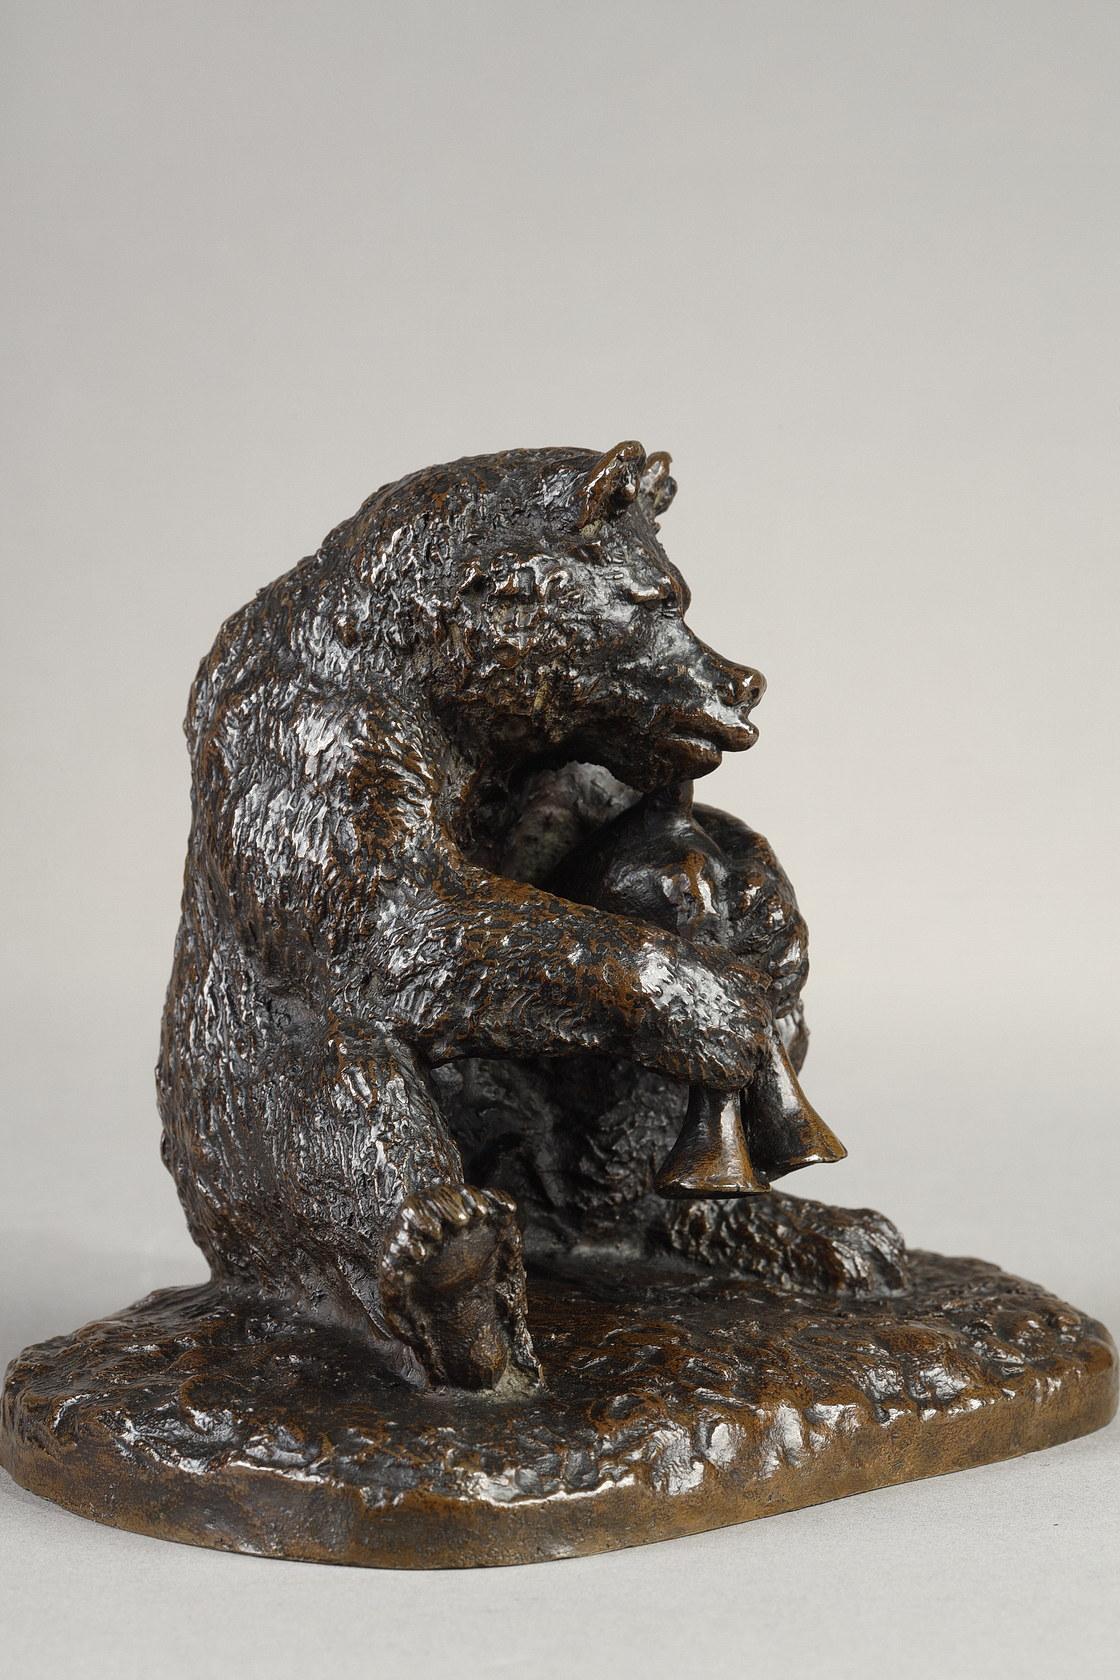 Bear Bagpiper - Gold Figurative Sculpture by Christopher Fratin